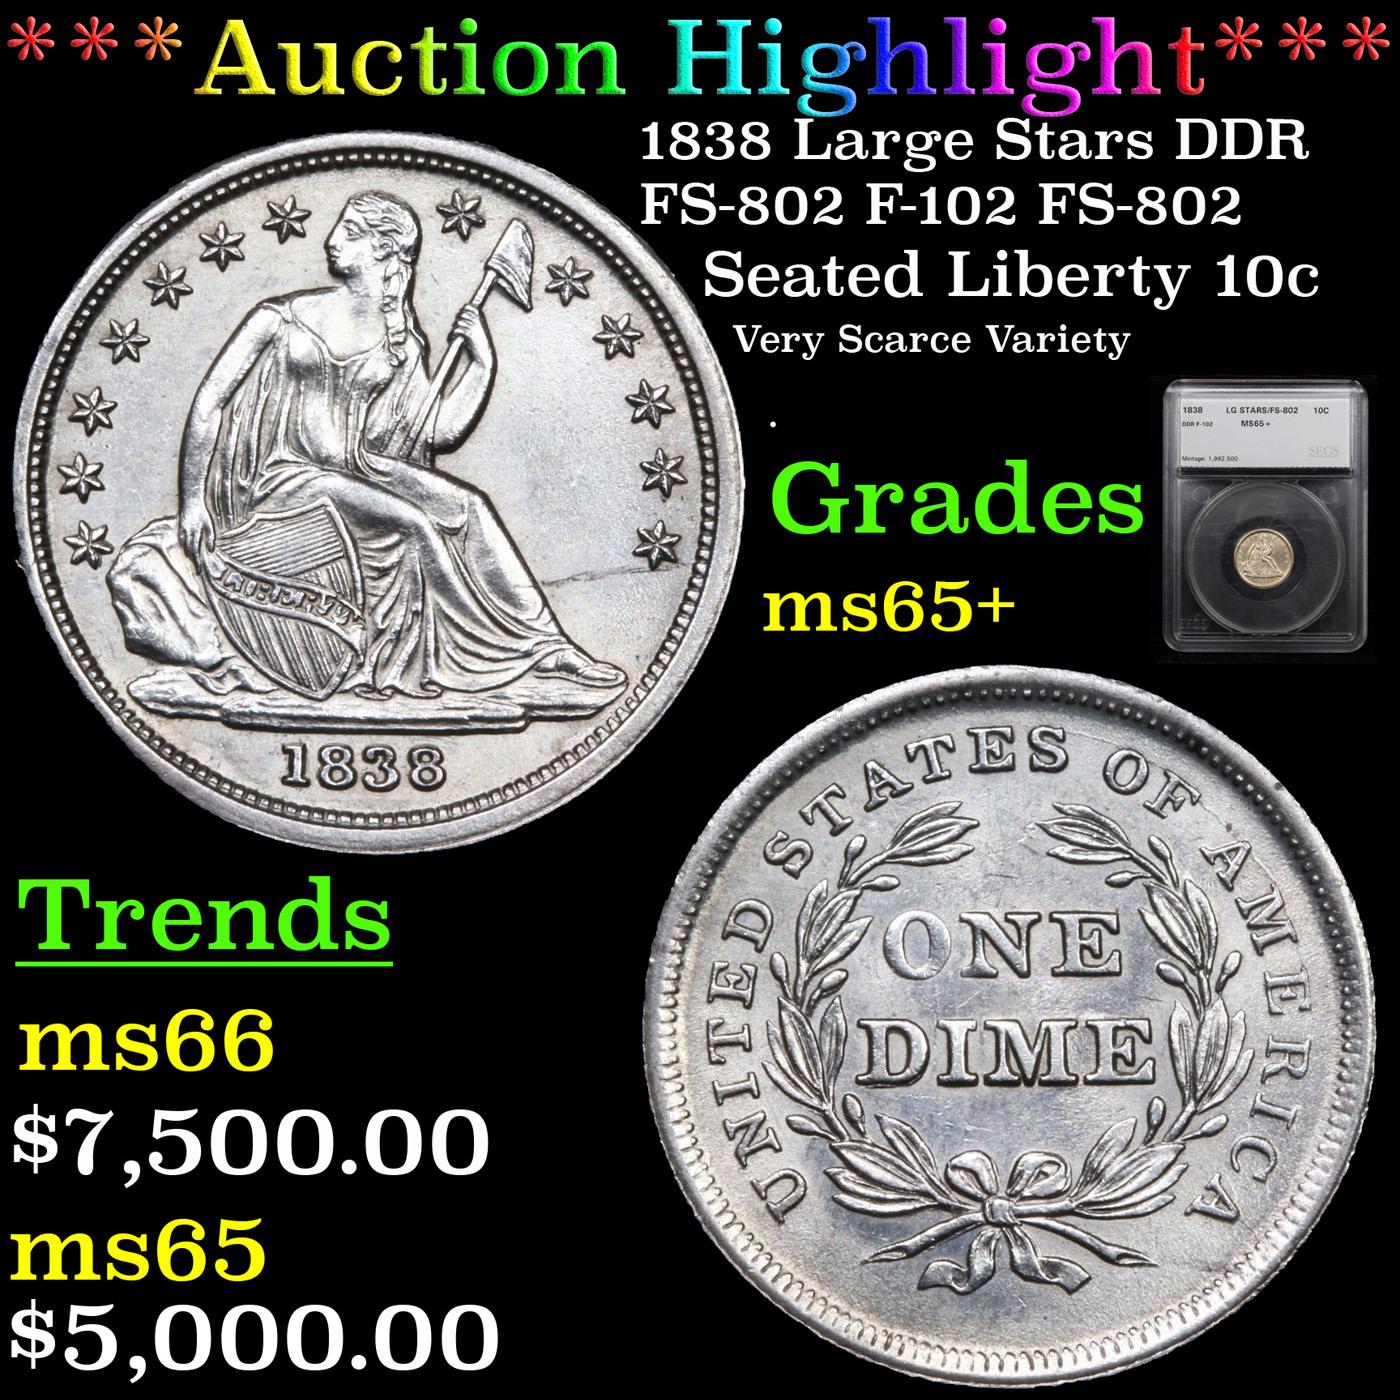 ***Auction Highlight*** 1838 Large Stars DDR FS-802 F-102 FS-802 Seated Liberty Dime 10c Graded ms65